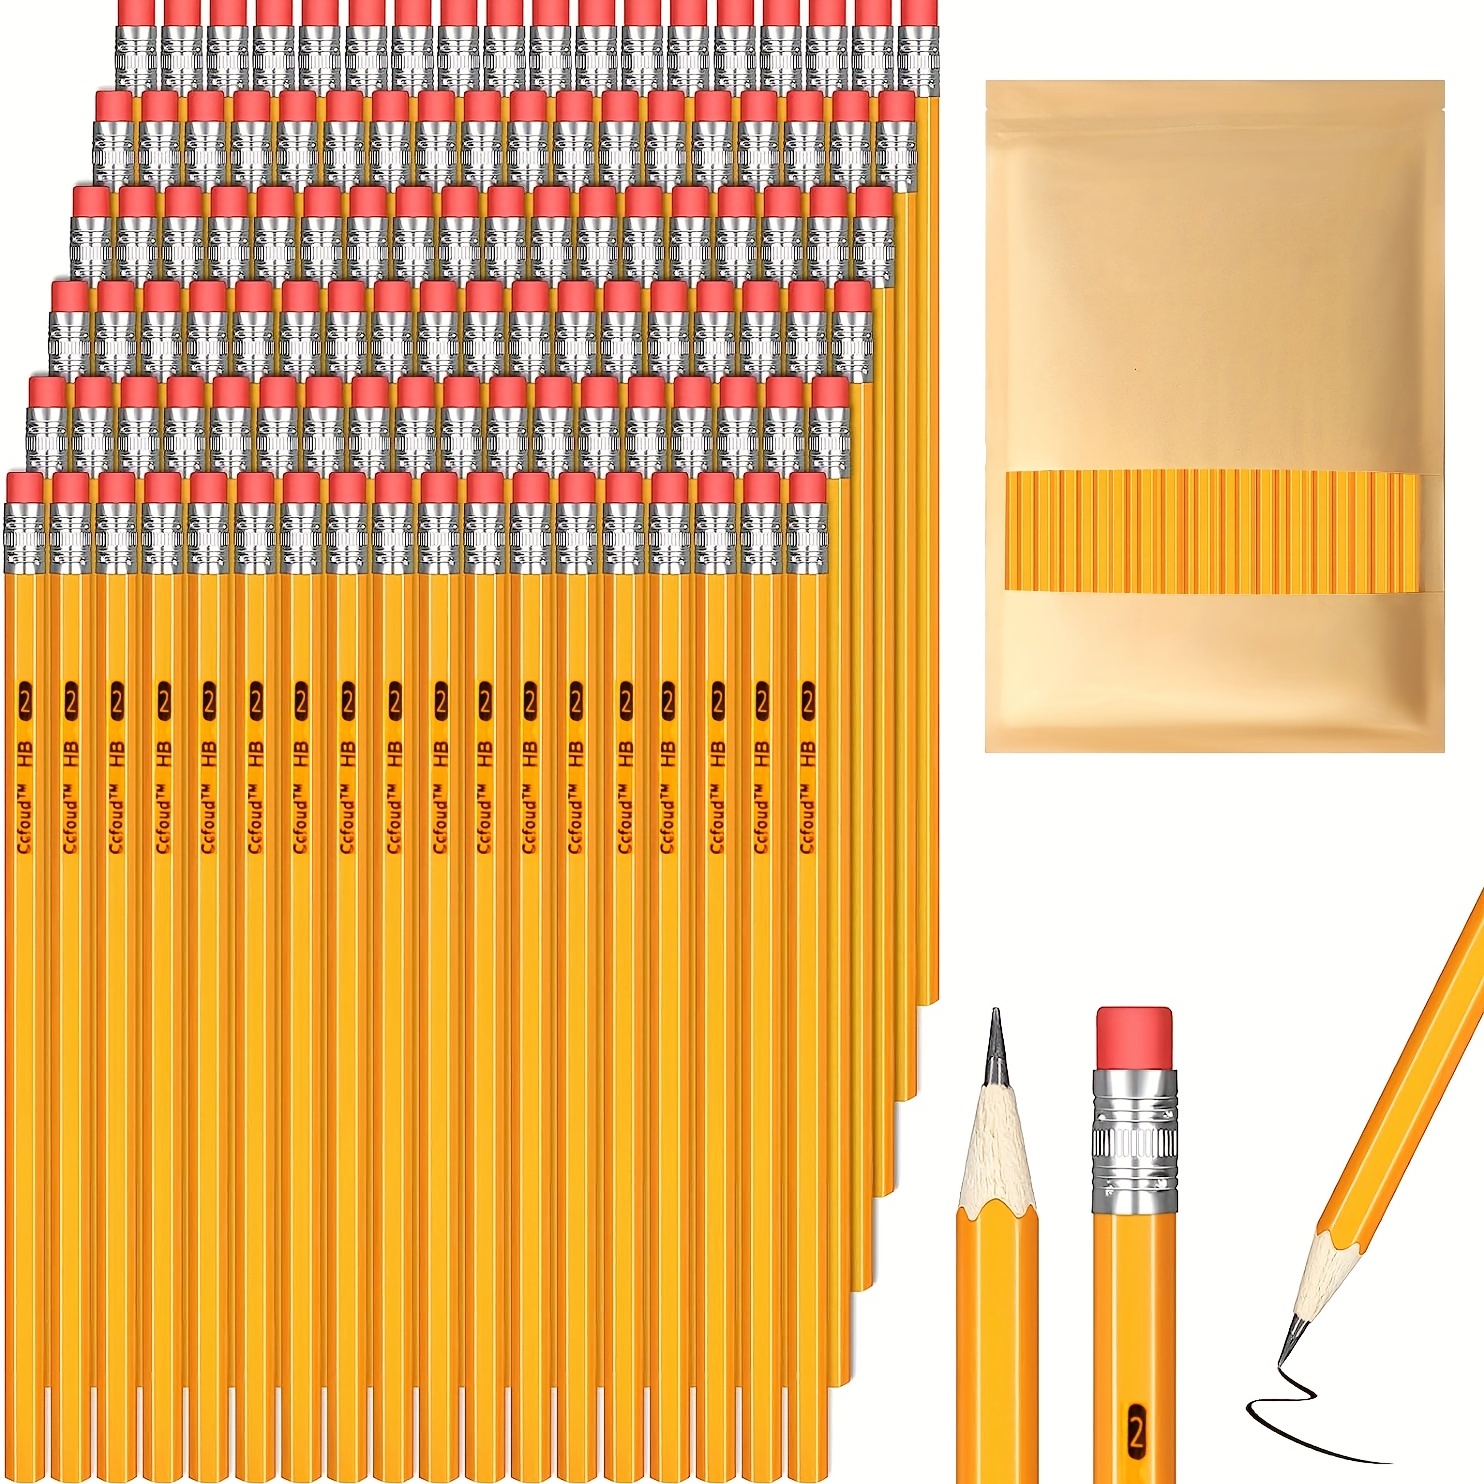 50/100/150pcs Pencils With Eraser Top, 2 HB Pencils For Writhing, Drawing  And Sketching, Yellow Wood-Cased Pencils For Office, School, Teacher And *